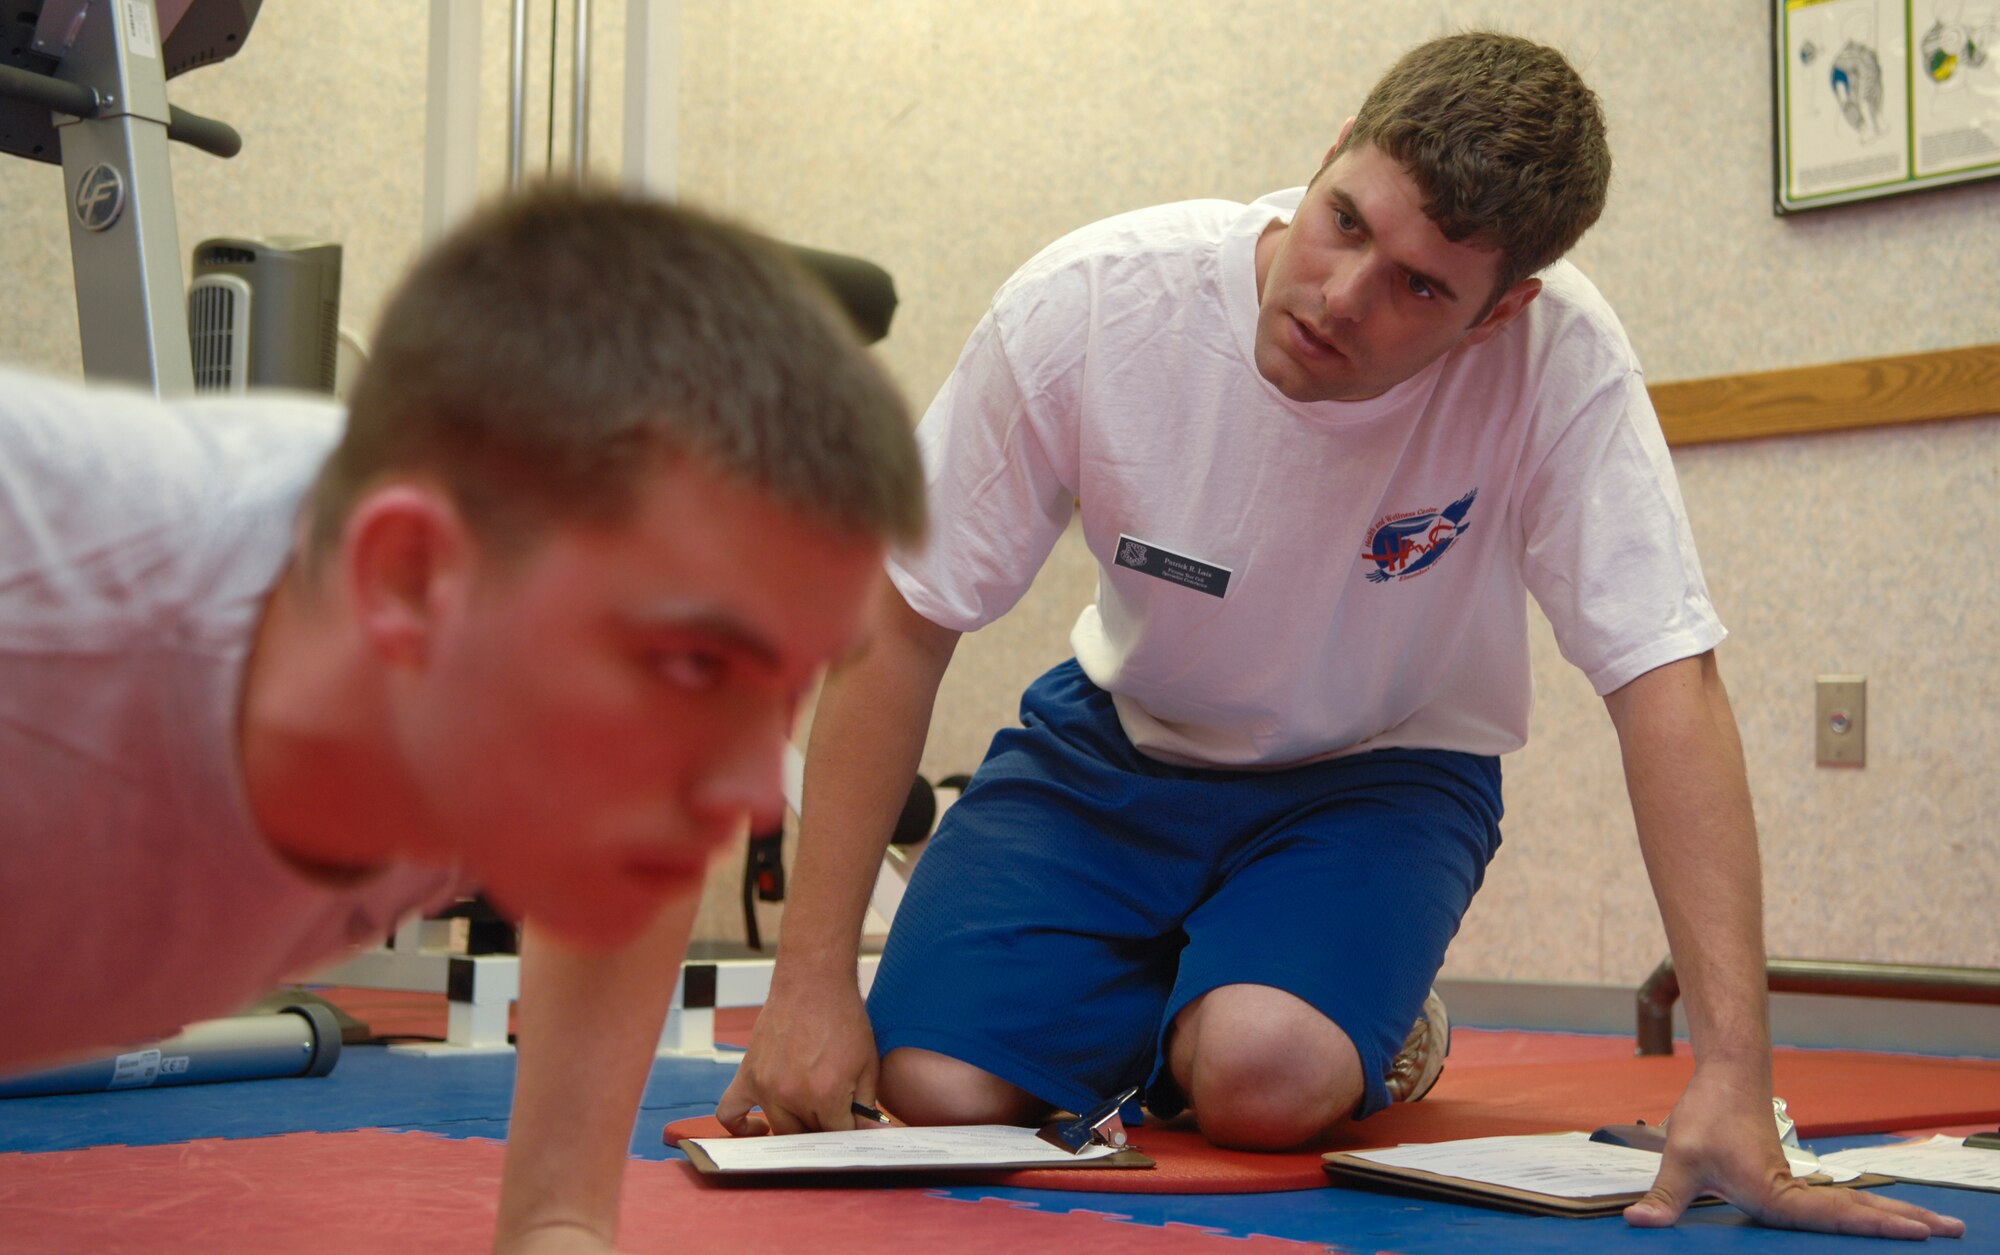 ELMENDORF AIR FORCE BASE, Alaska -- Patrick Lais observes the pushups of a tester during a PT evaluation July 17. The Health and Wellness Center have begun employing civilian and contracted members to take over the centralized PT testing. Lais is a fitness test cell specialist with the HAWC. (U.S. Air Force photo/Senior Airman David Carbajal)